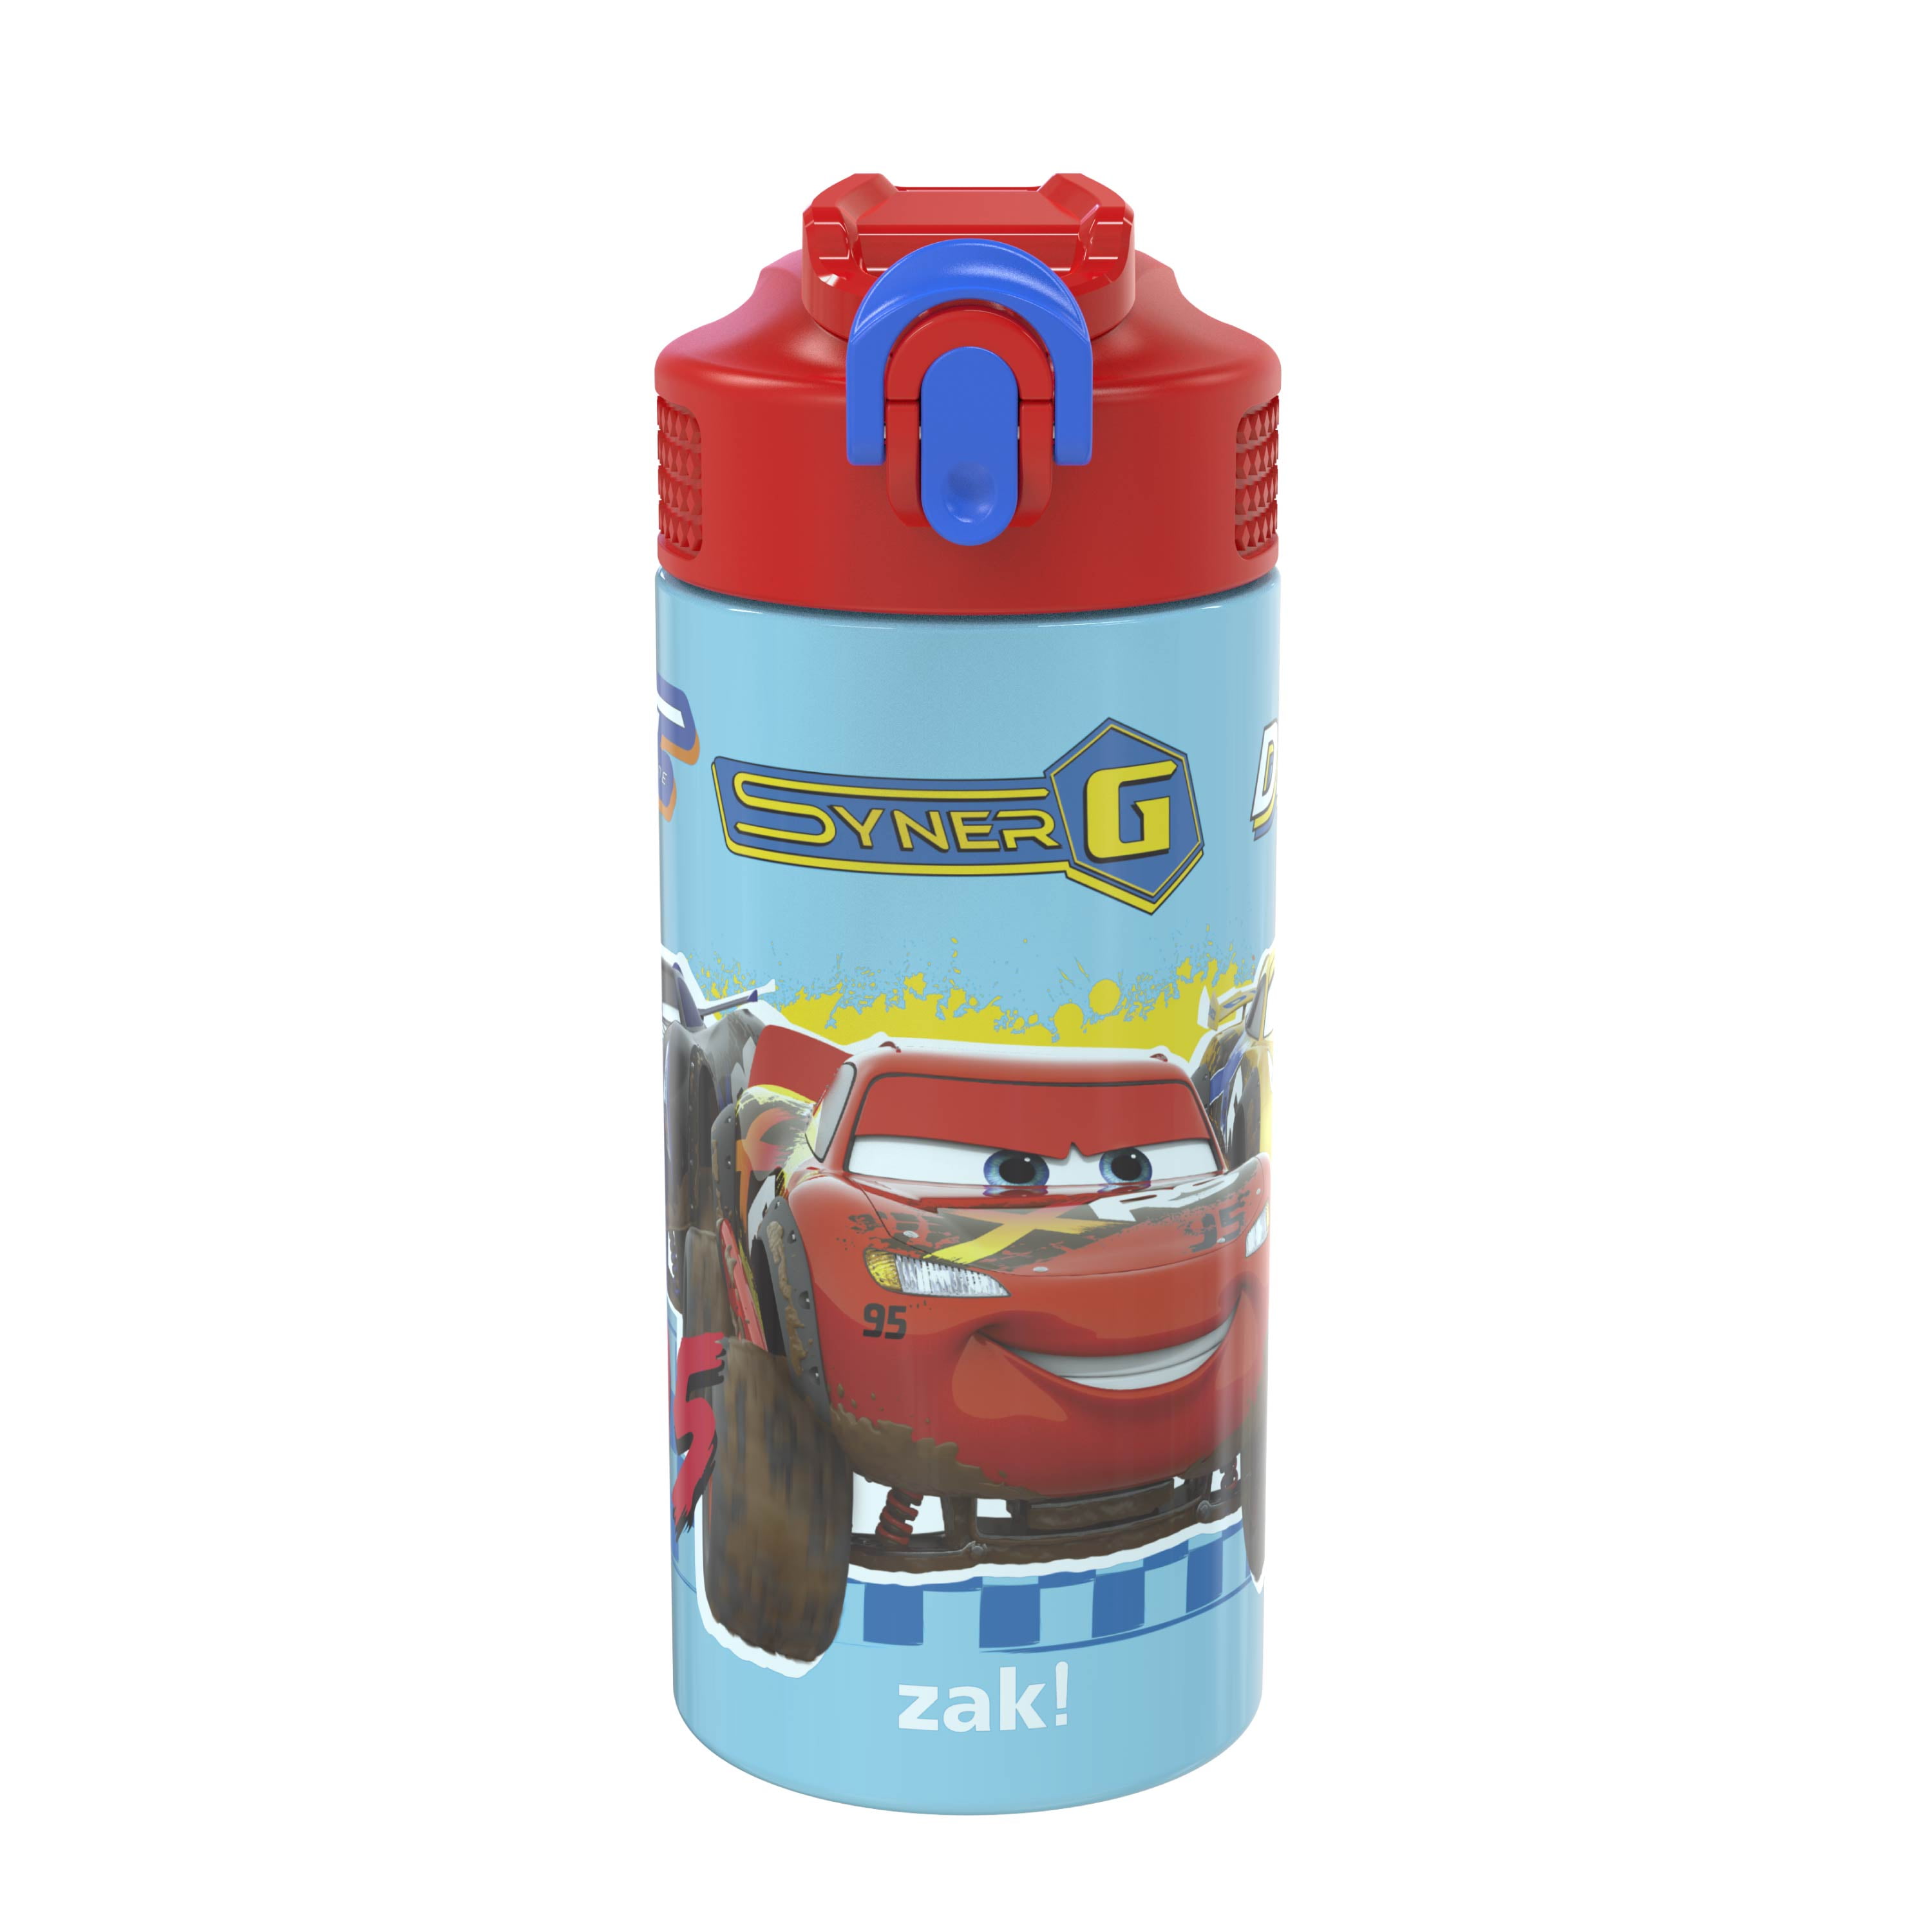 Wusikd Monster Truck Water Bottle with Straw Lid Double Wall Car Thermos  Bottle Vacuum Insulated Fla…See more Wusikd Monster Truck Water Bottle with